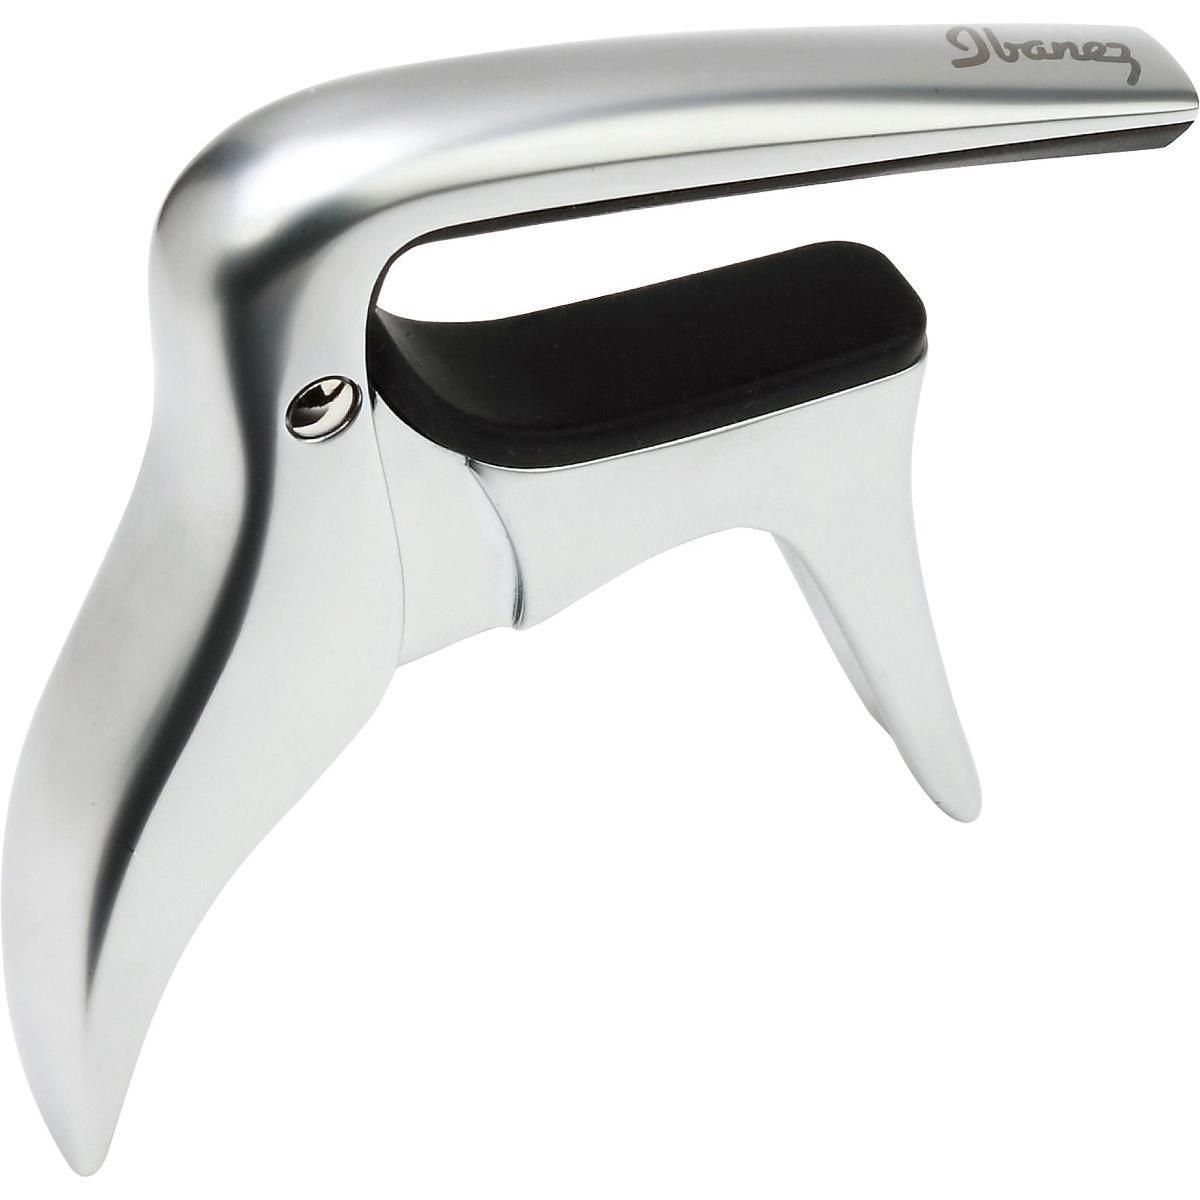 Image of Ibanez Stainless Steel Capo for Acoustic and Electric Guitars